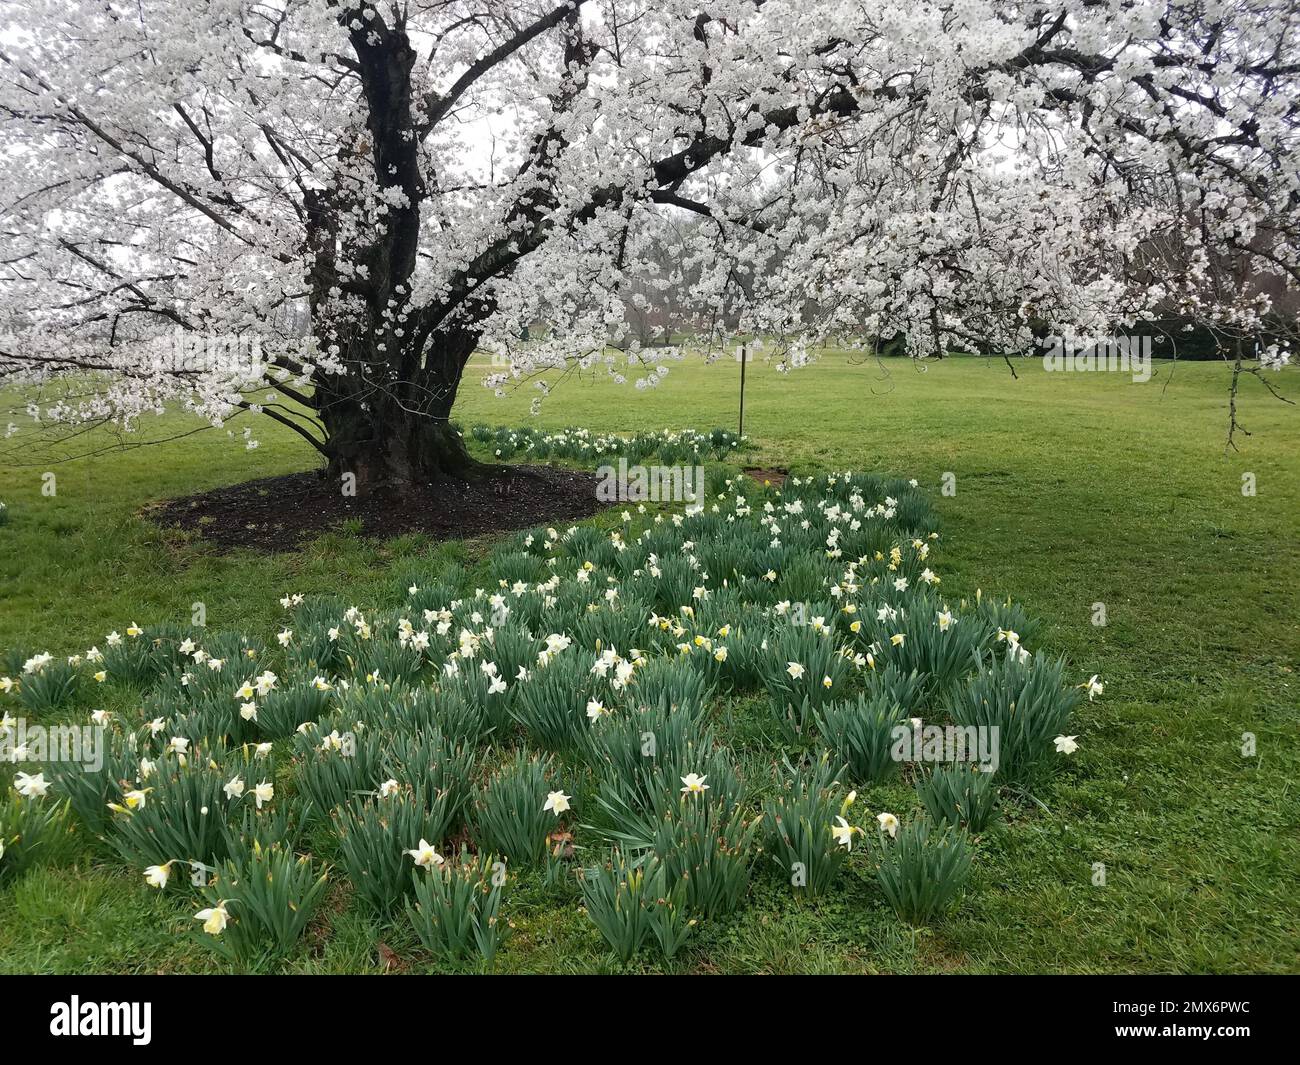 tree blooming with white cherry blossoms outdoor with green grass. Stock Photo